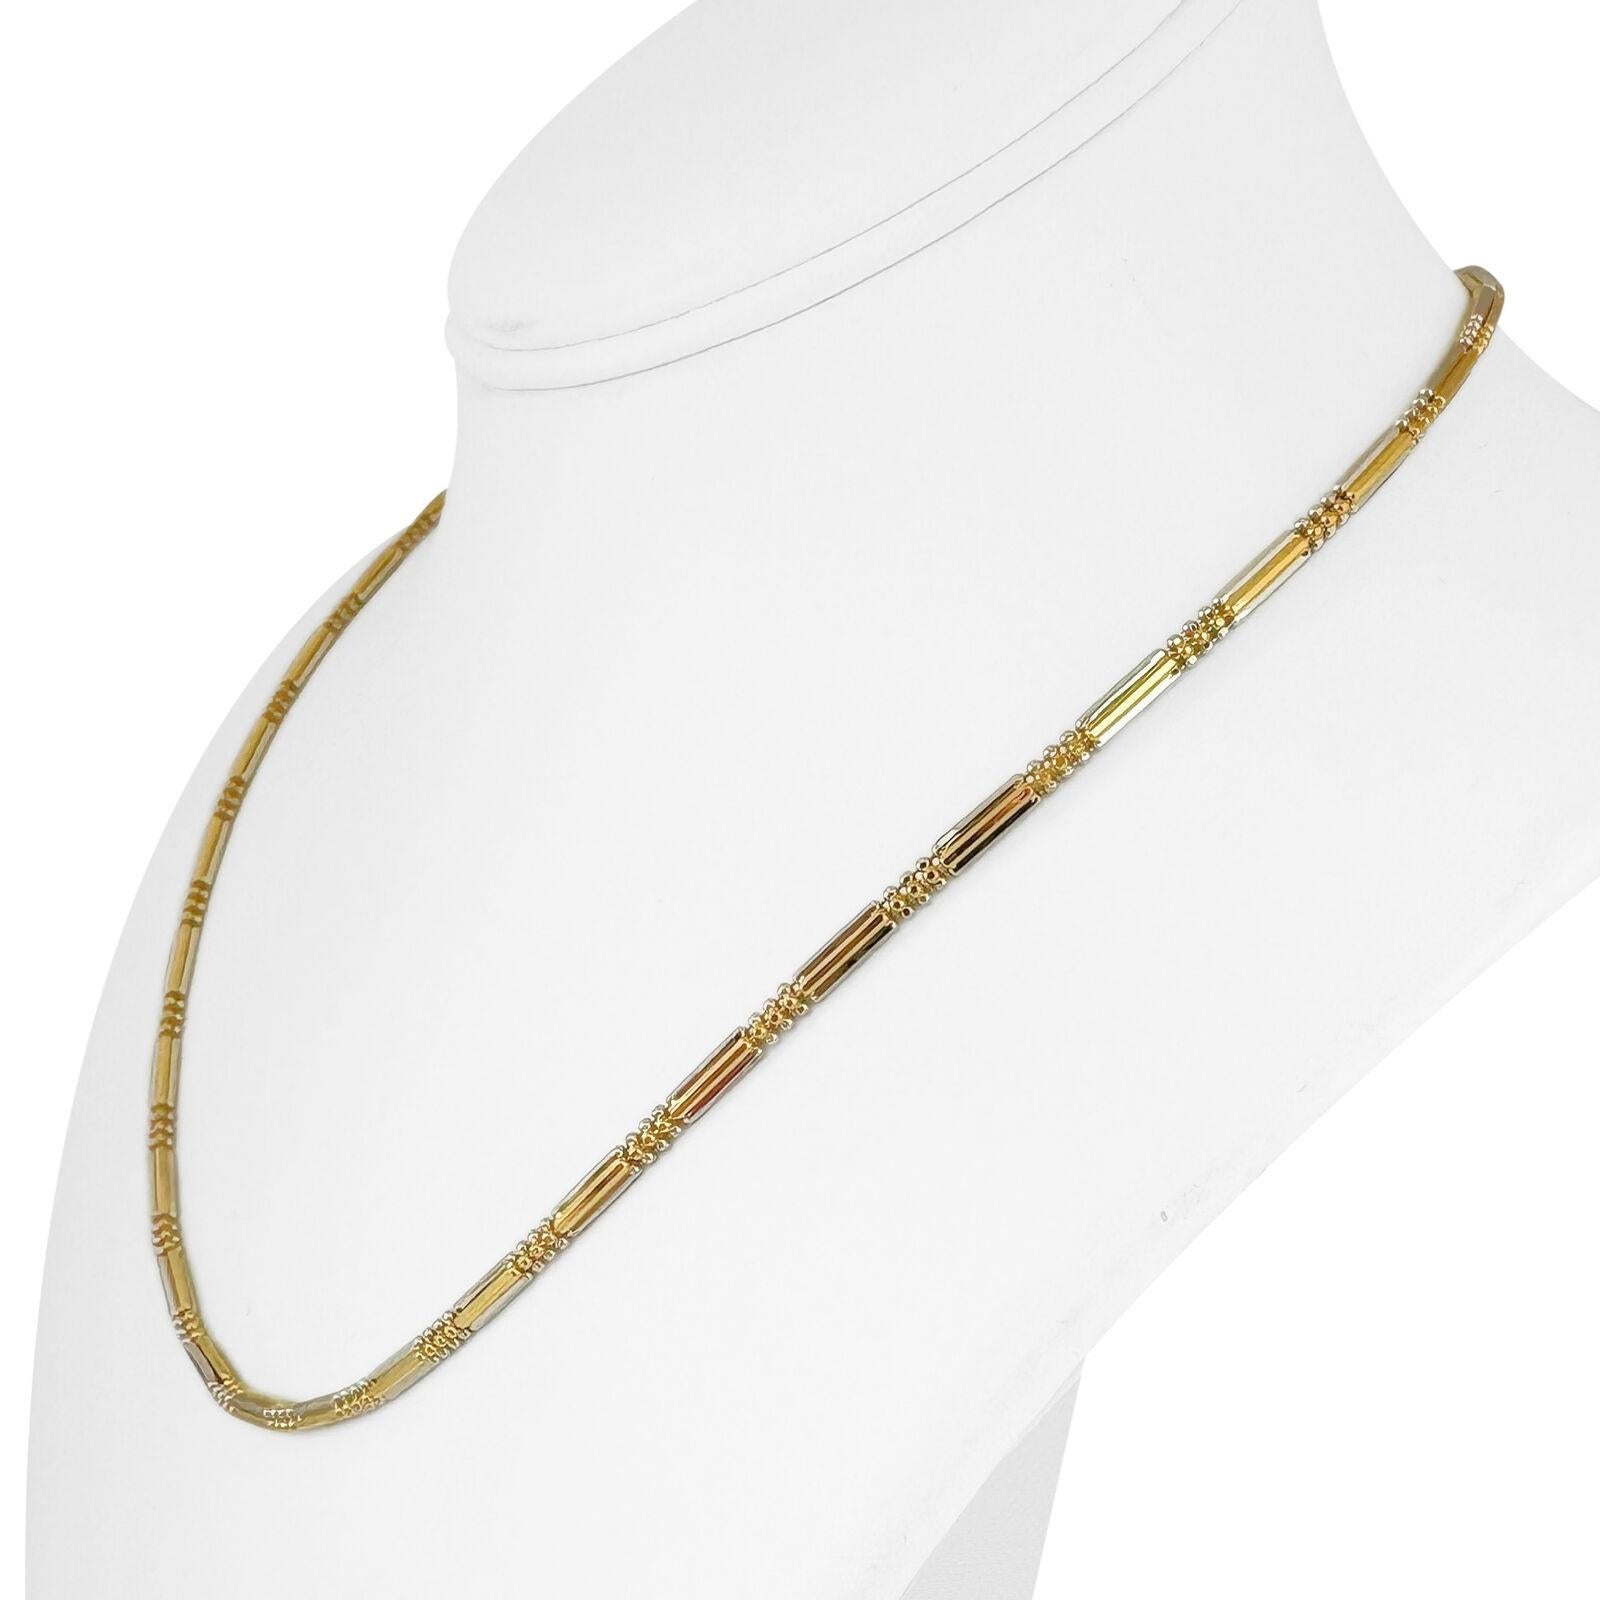 22k Yellow and White Gold 13.3g Two Tone 2.5mm Bar and Bead Link Necklace 18